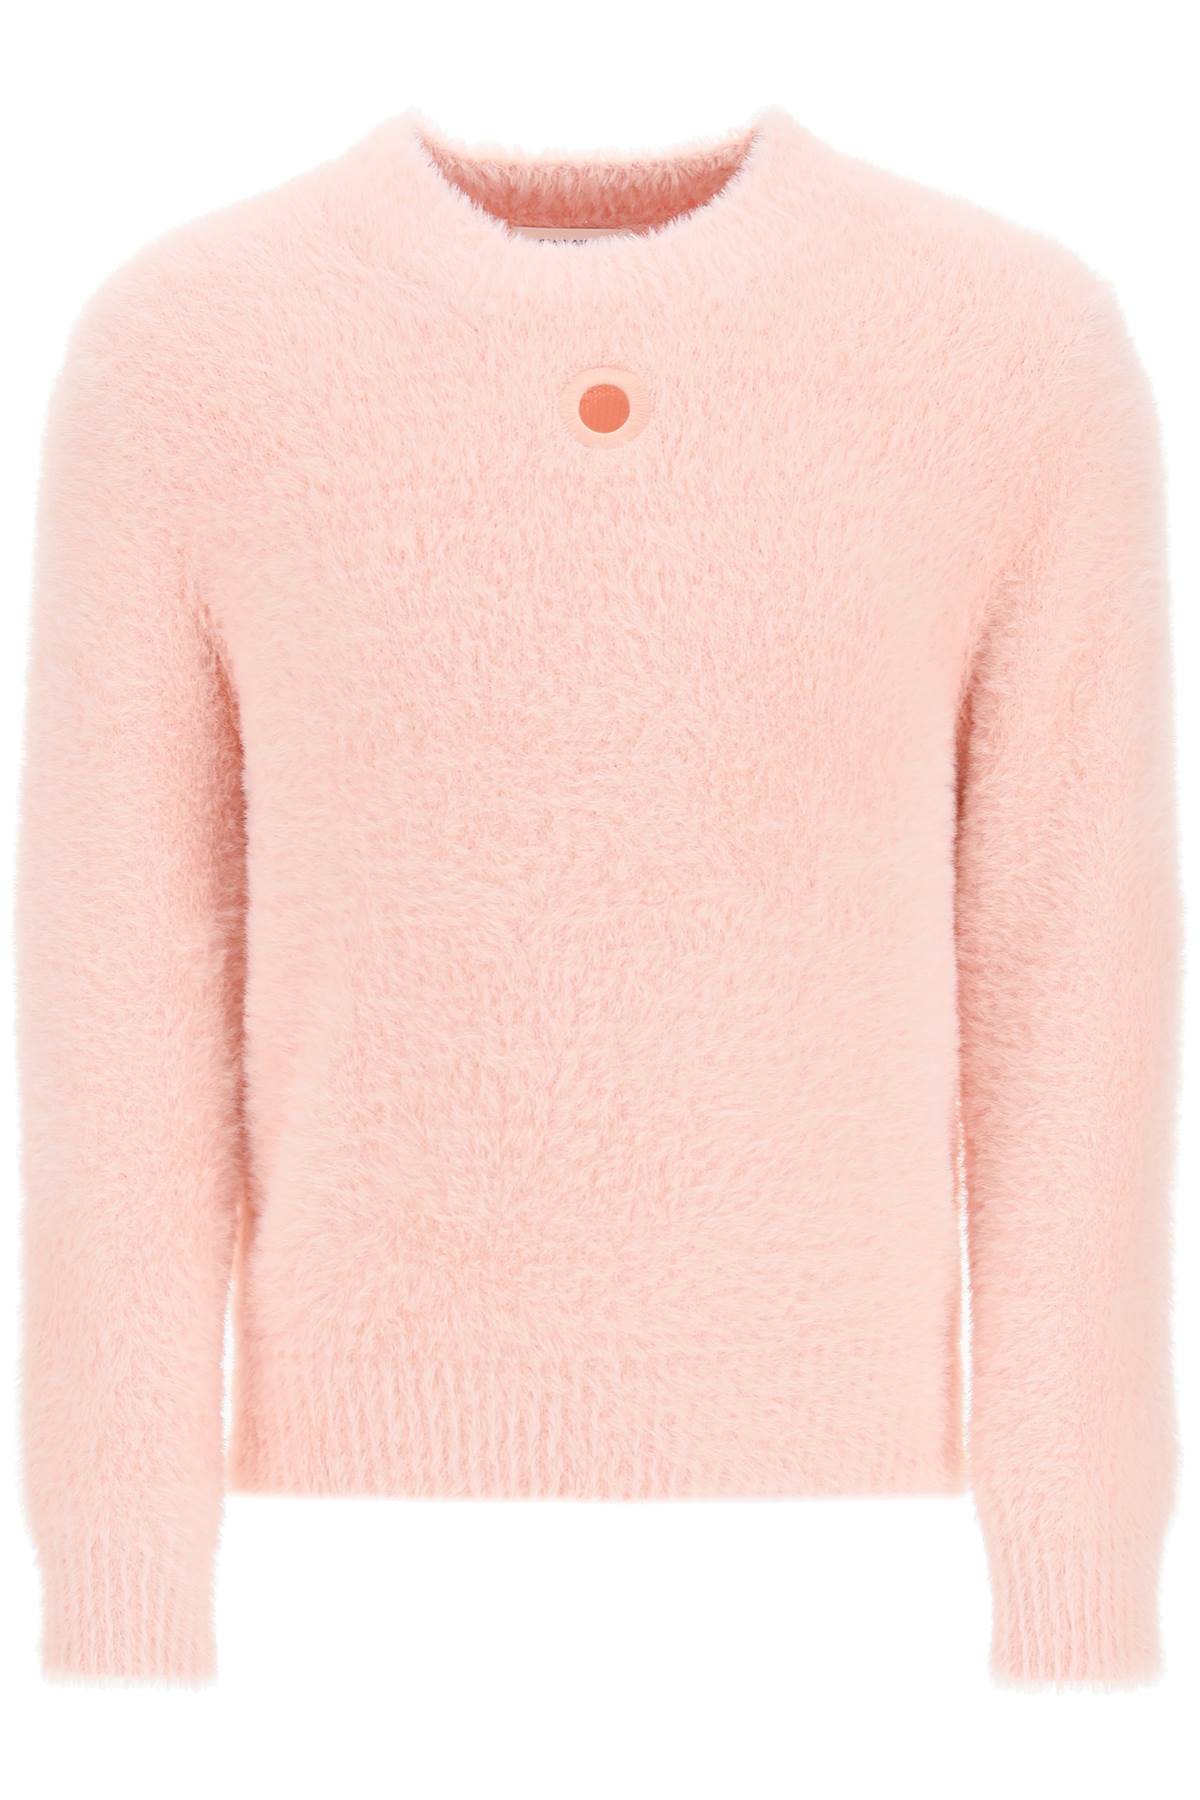 Craig Green Fluffy Sweater With Eyelet